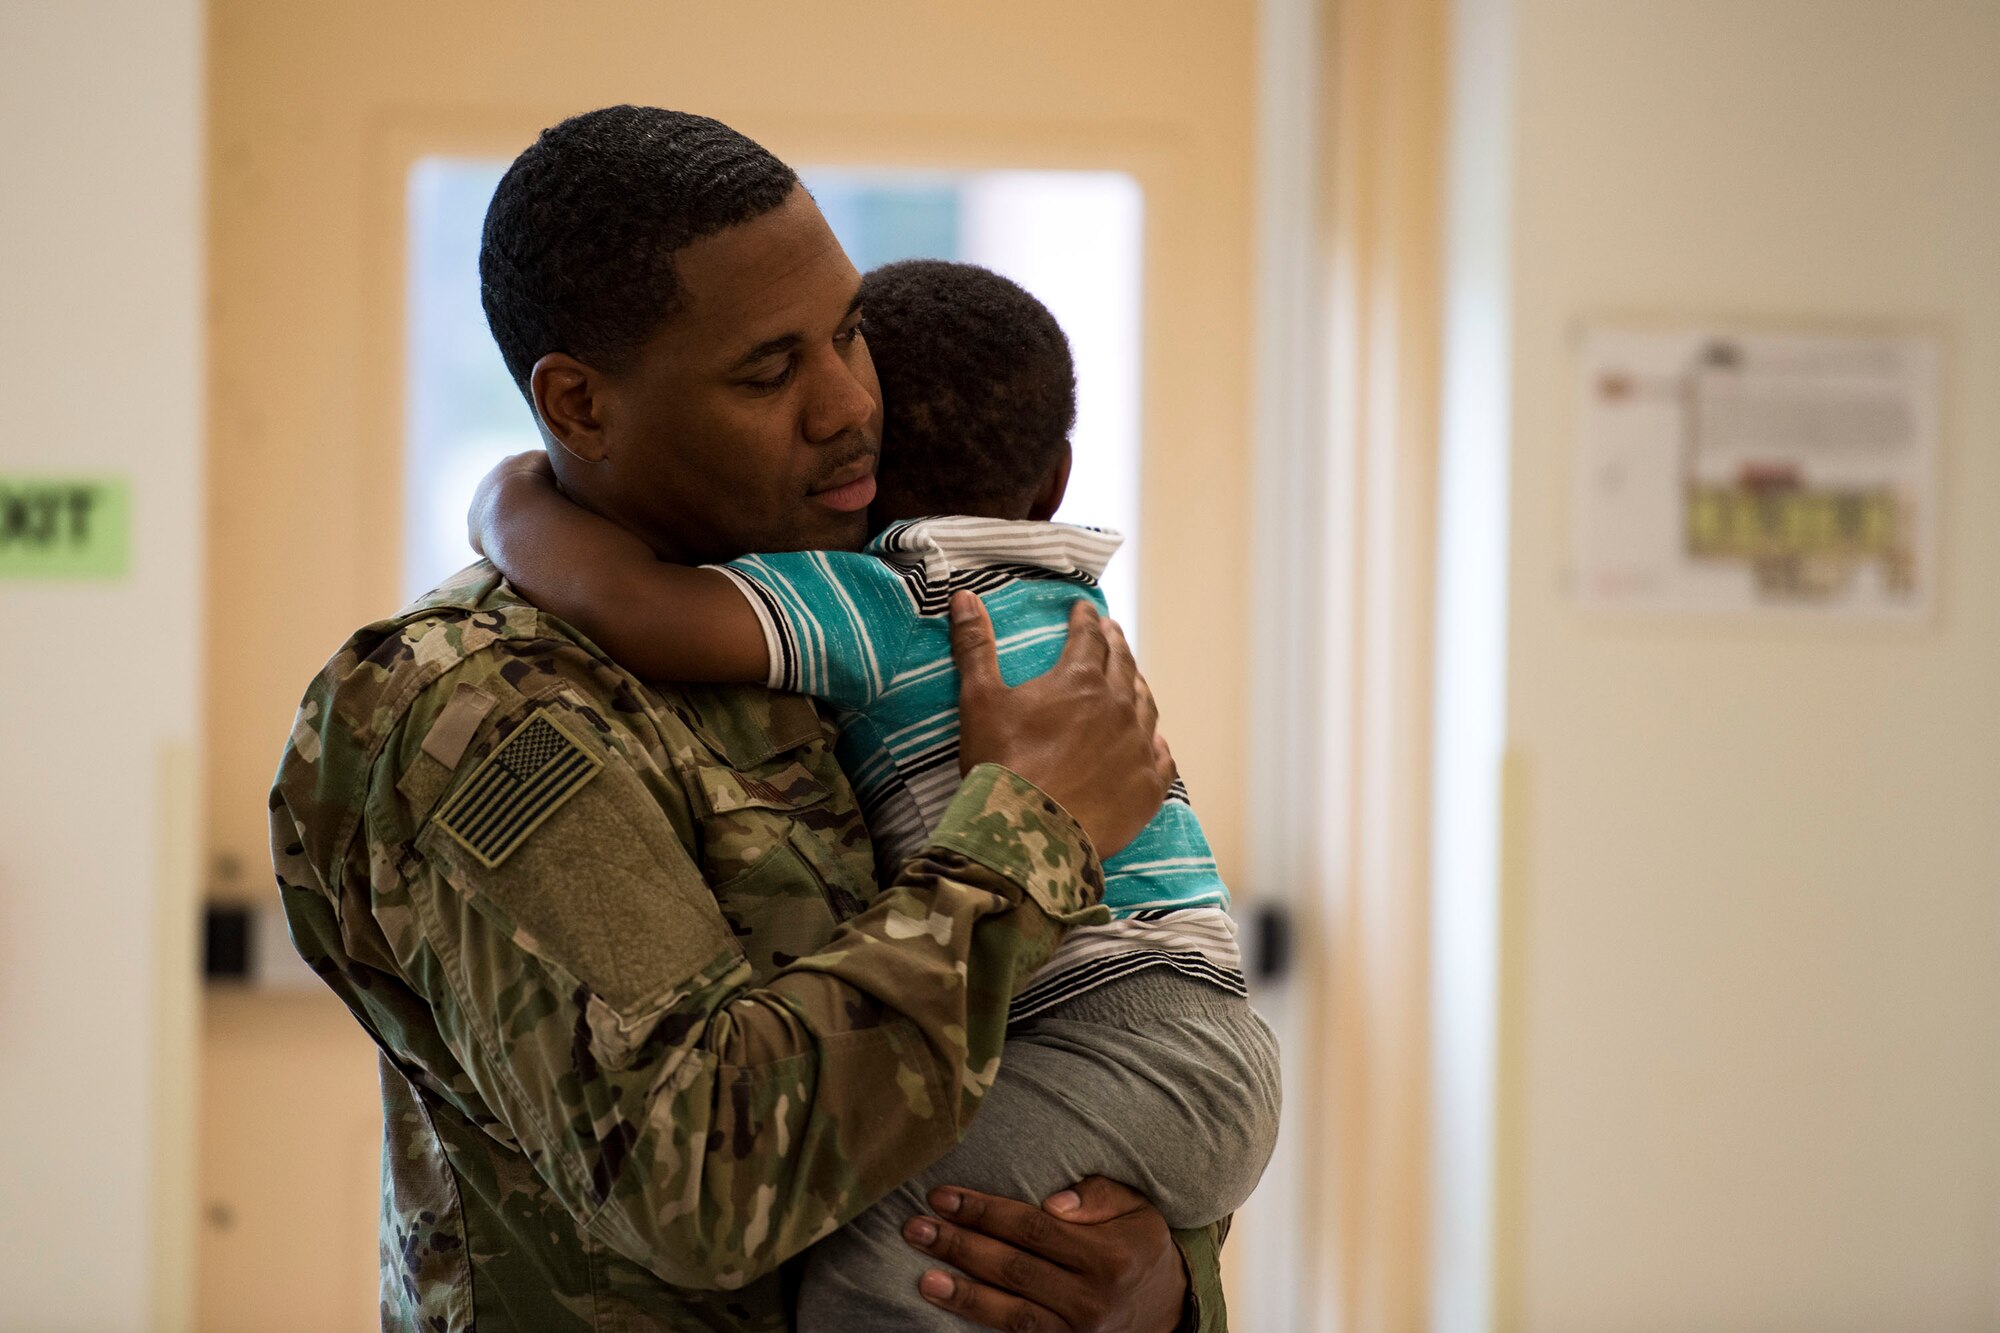 Staff Sgt. Edward Wilson, 6th Security Forces Squadron standardization and evaluation craftsman, hugs his child during the Teddy Bear Picnic, April 26, 2019, at Moody Air Force Base, Ga. The Child Development Center hosted the event in support of the Month of the Military Child in April. (U.S. Air Force photo by Senior Airman Erick Requadt)